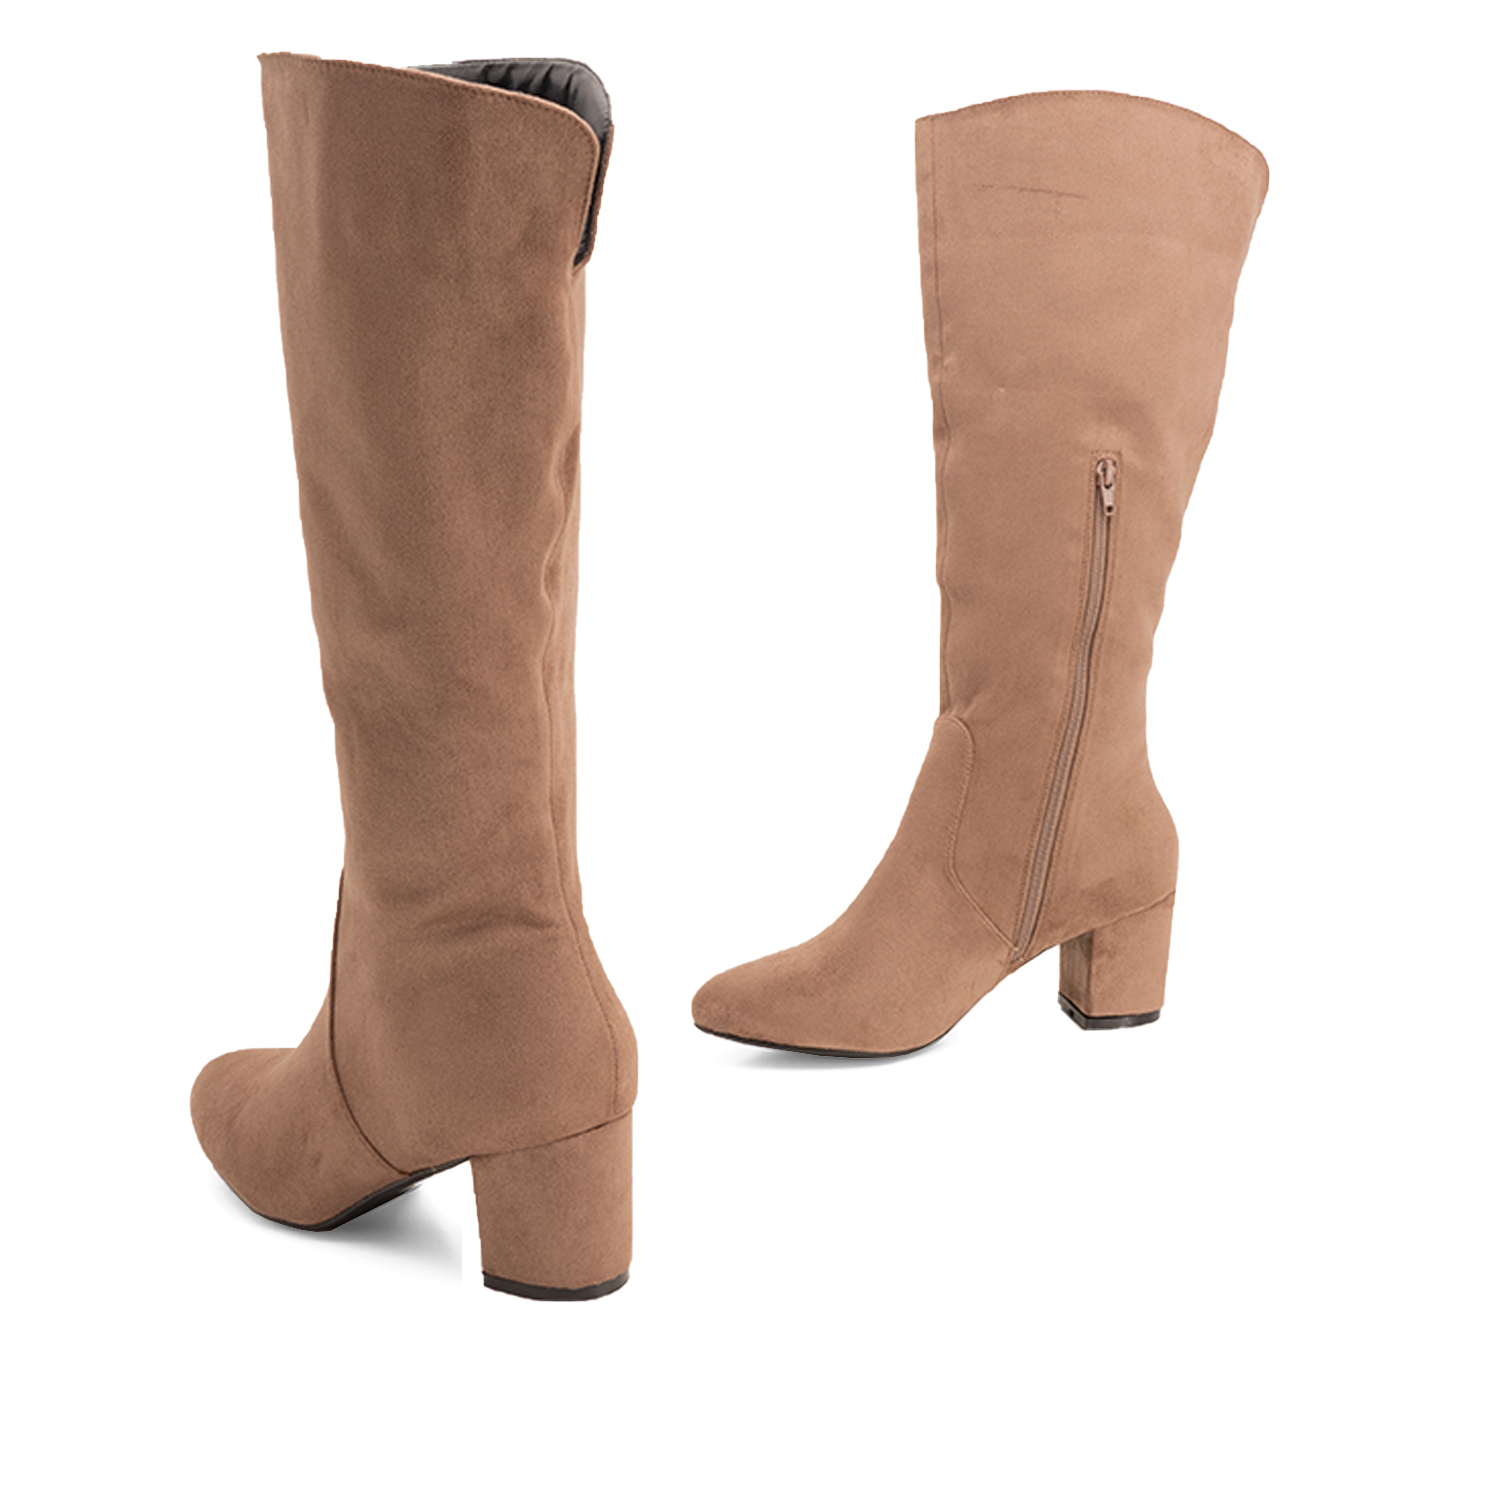 Heeled mid-calf boots in light brown faux suede 